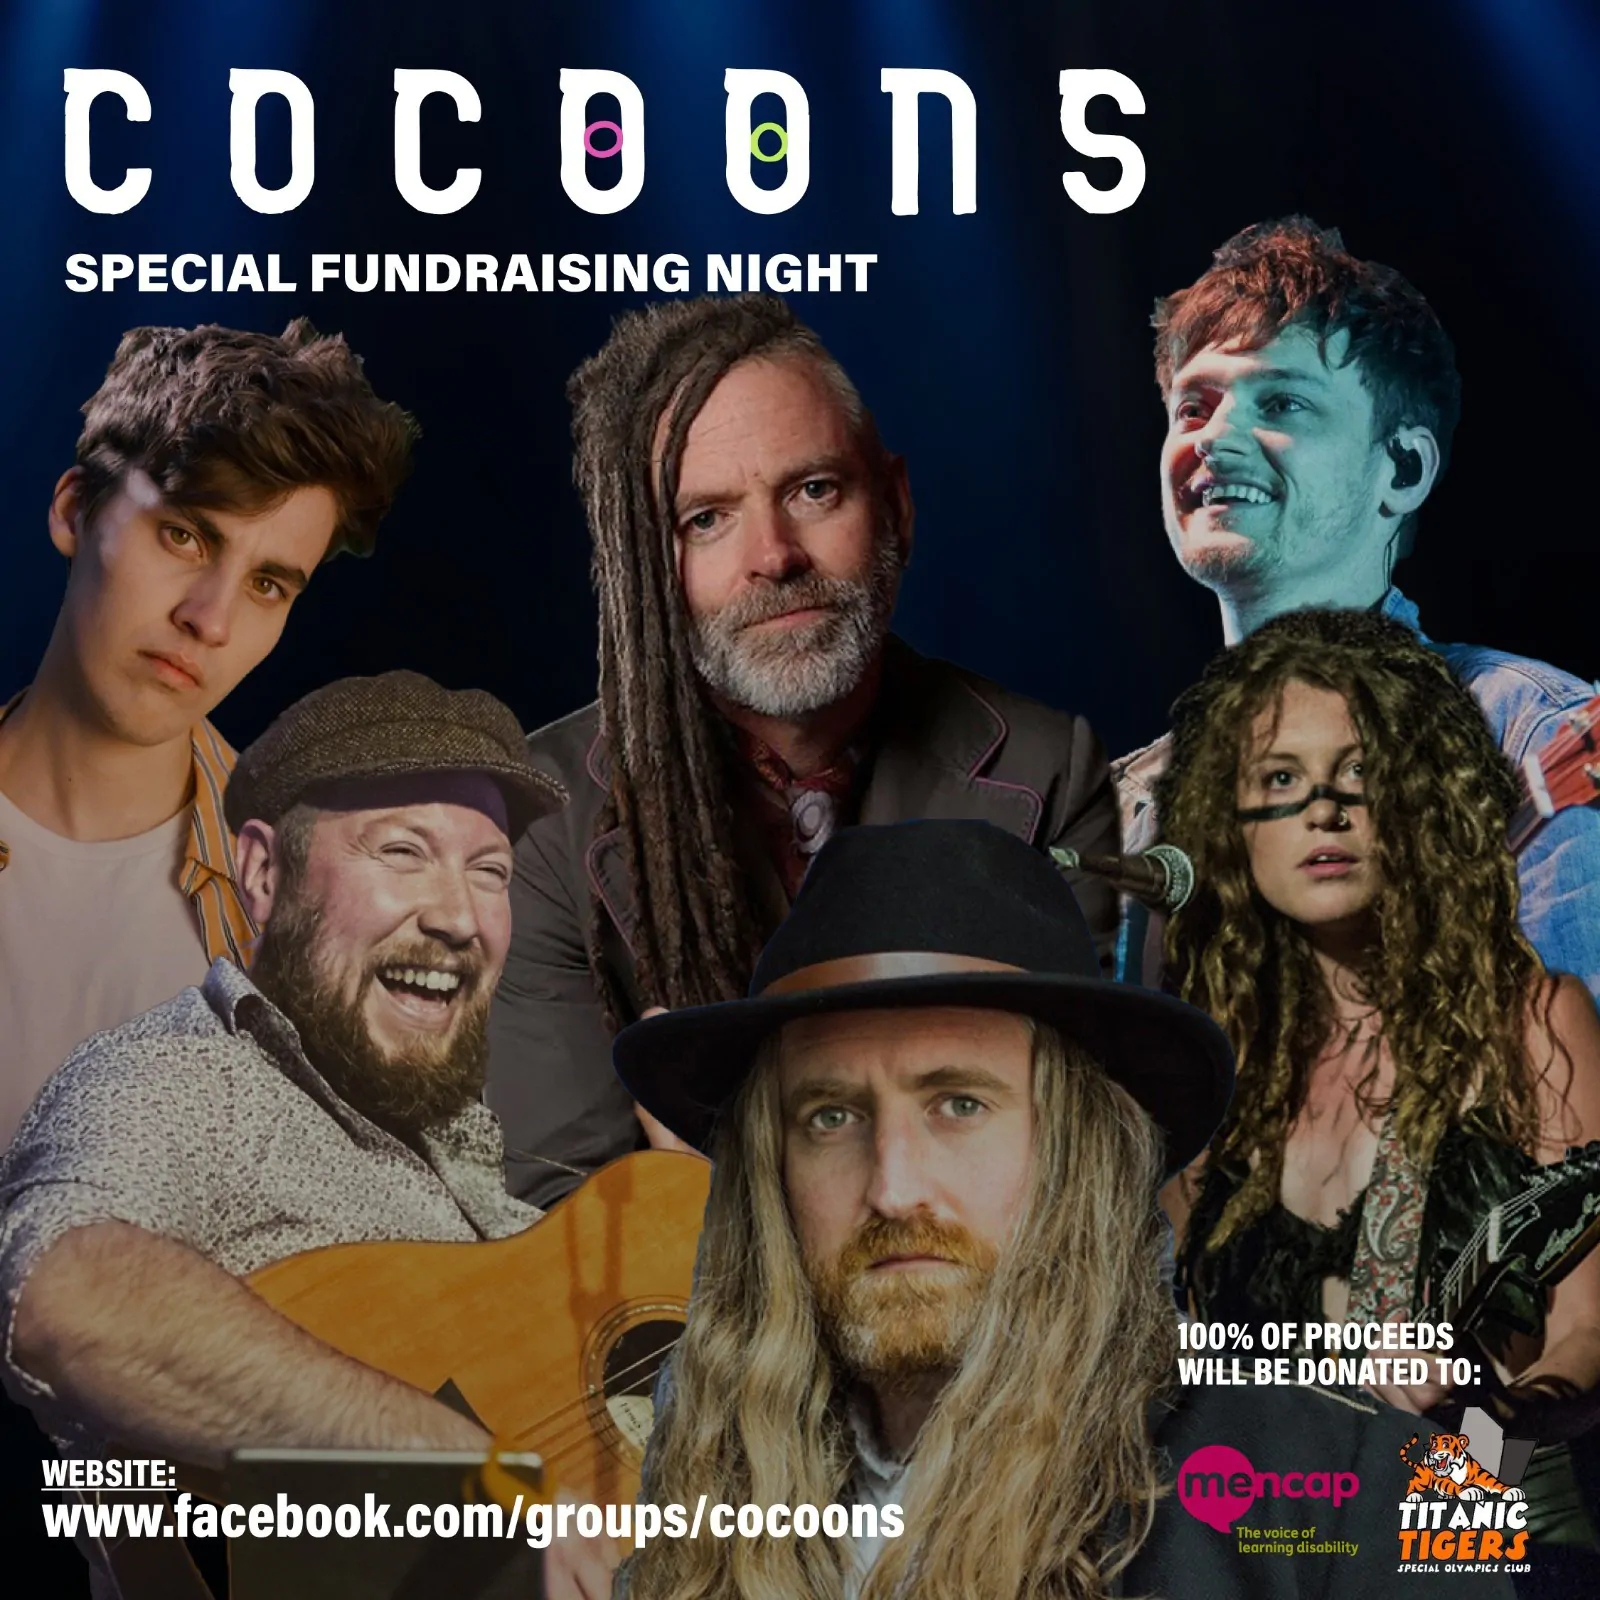 Ryan McMullan, JC Stewart, Duke Special, Cormac Neeson, Amy Montgomery and Matt McGinn to raise money for charity with special online gig Tonight